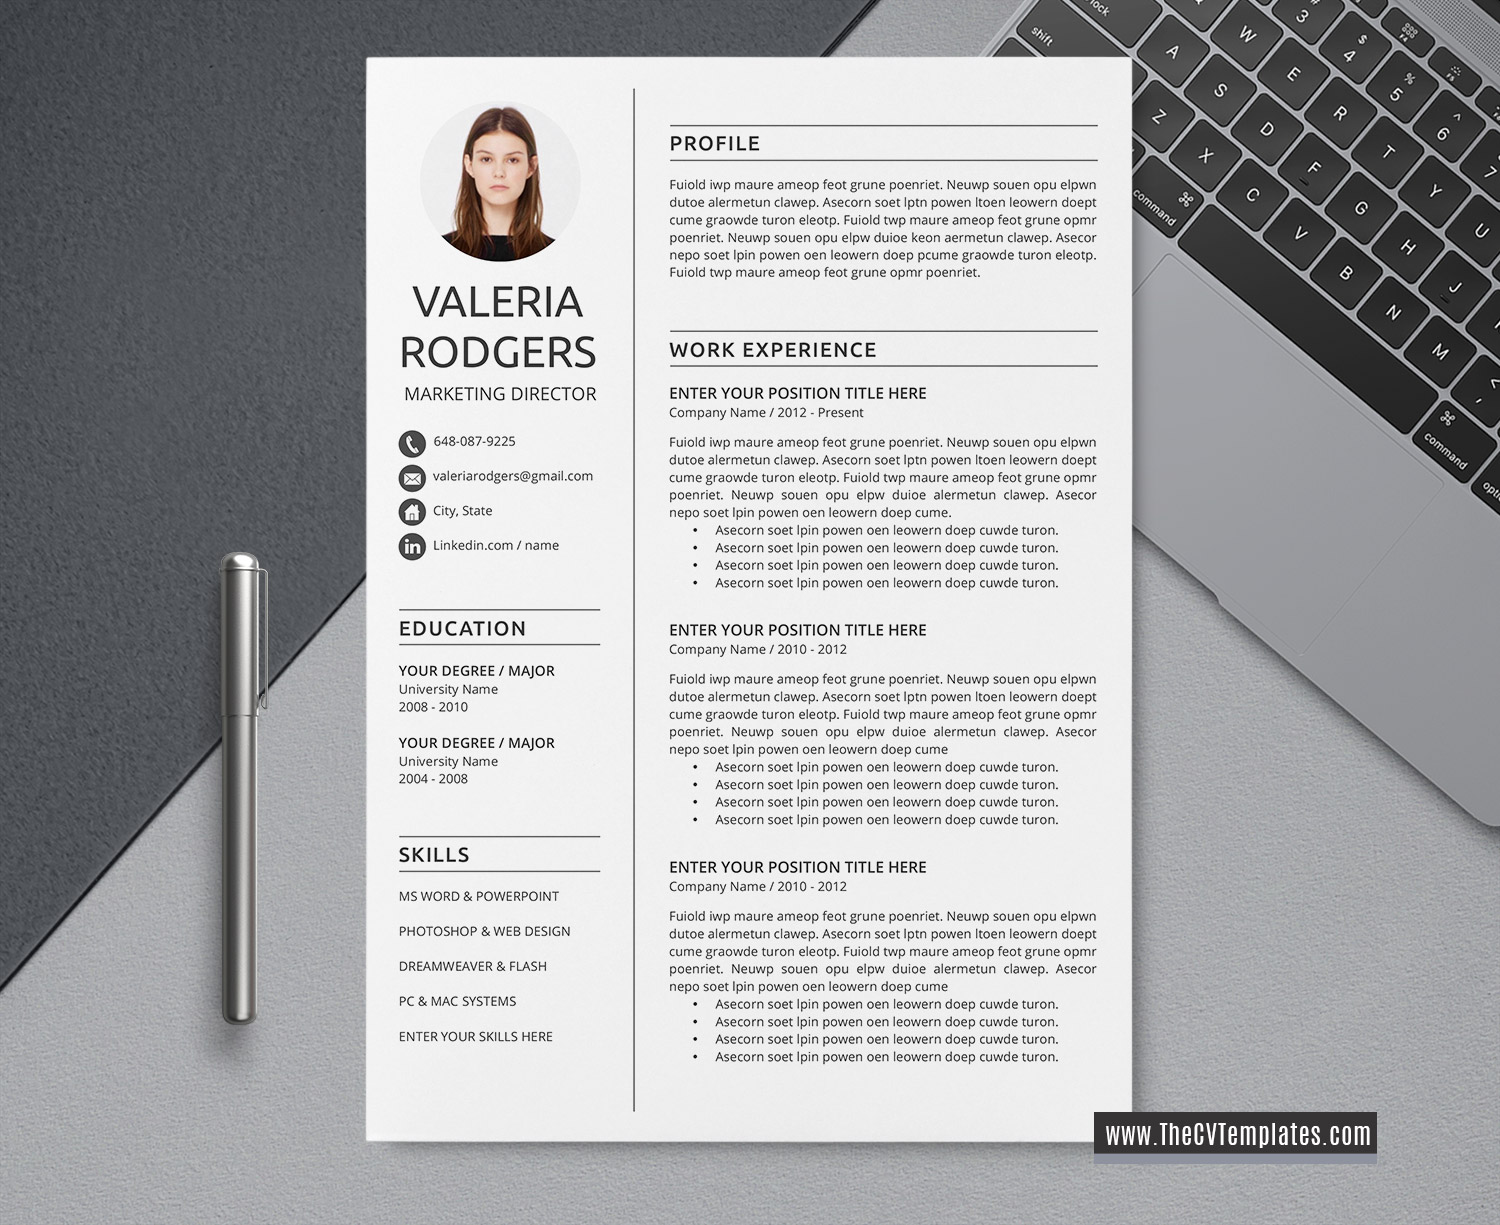 Modern Resume Template Word from www.thecvtemplates.com